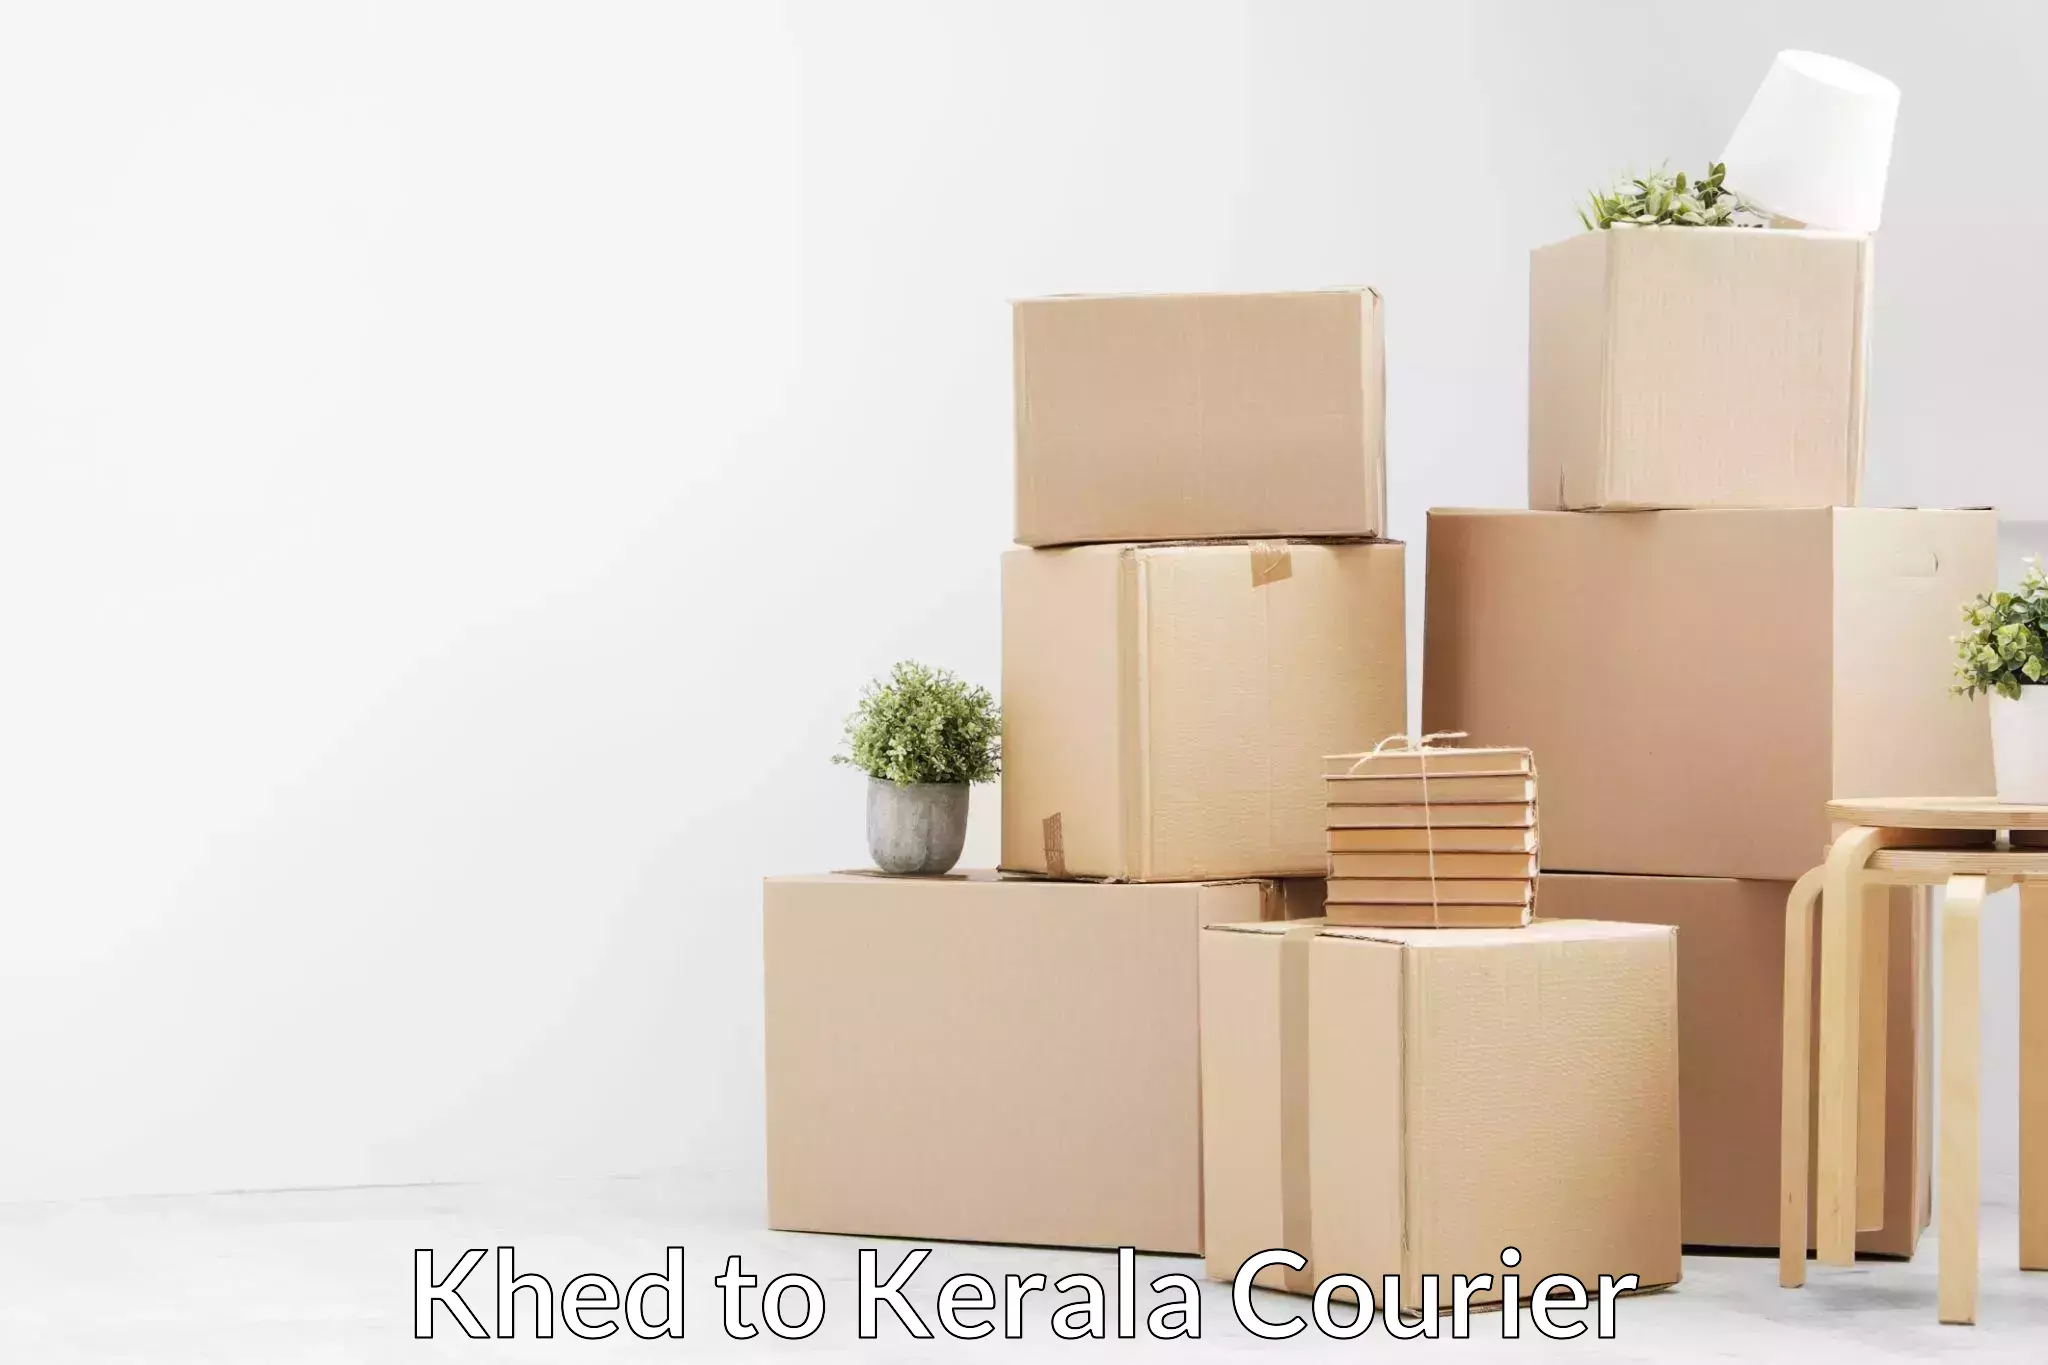 Professional movers Khed to Kerala